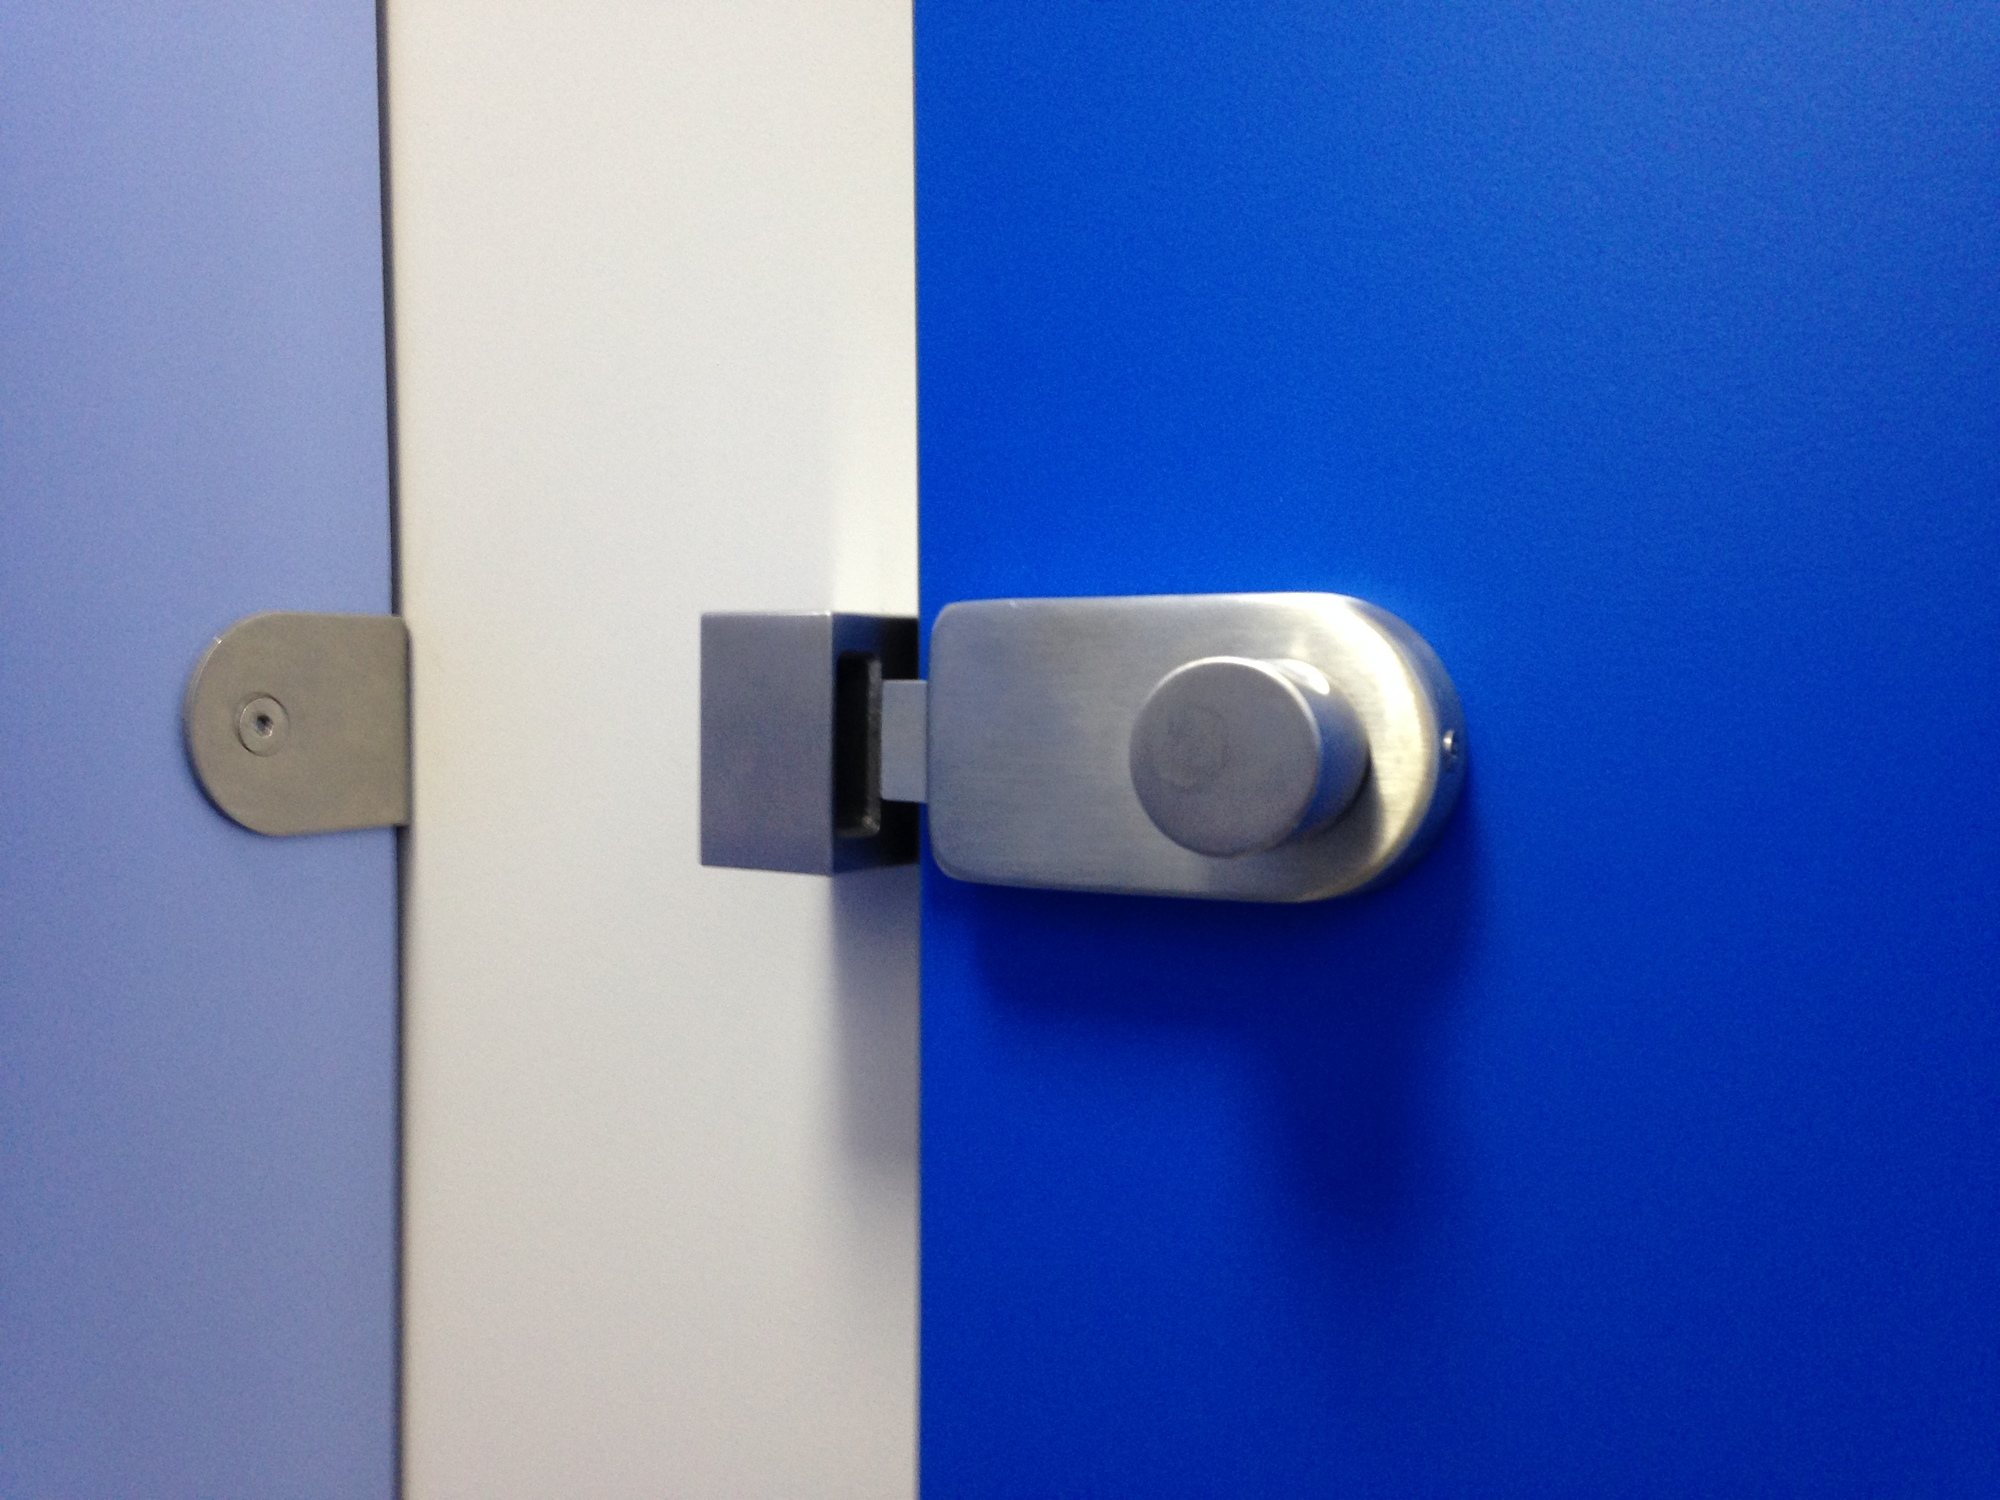 A new toilet door lock in Bournemouth and Poole College.